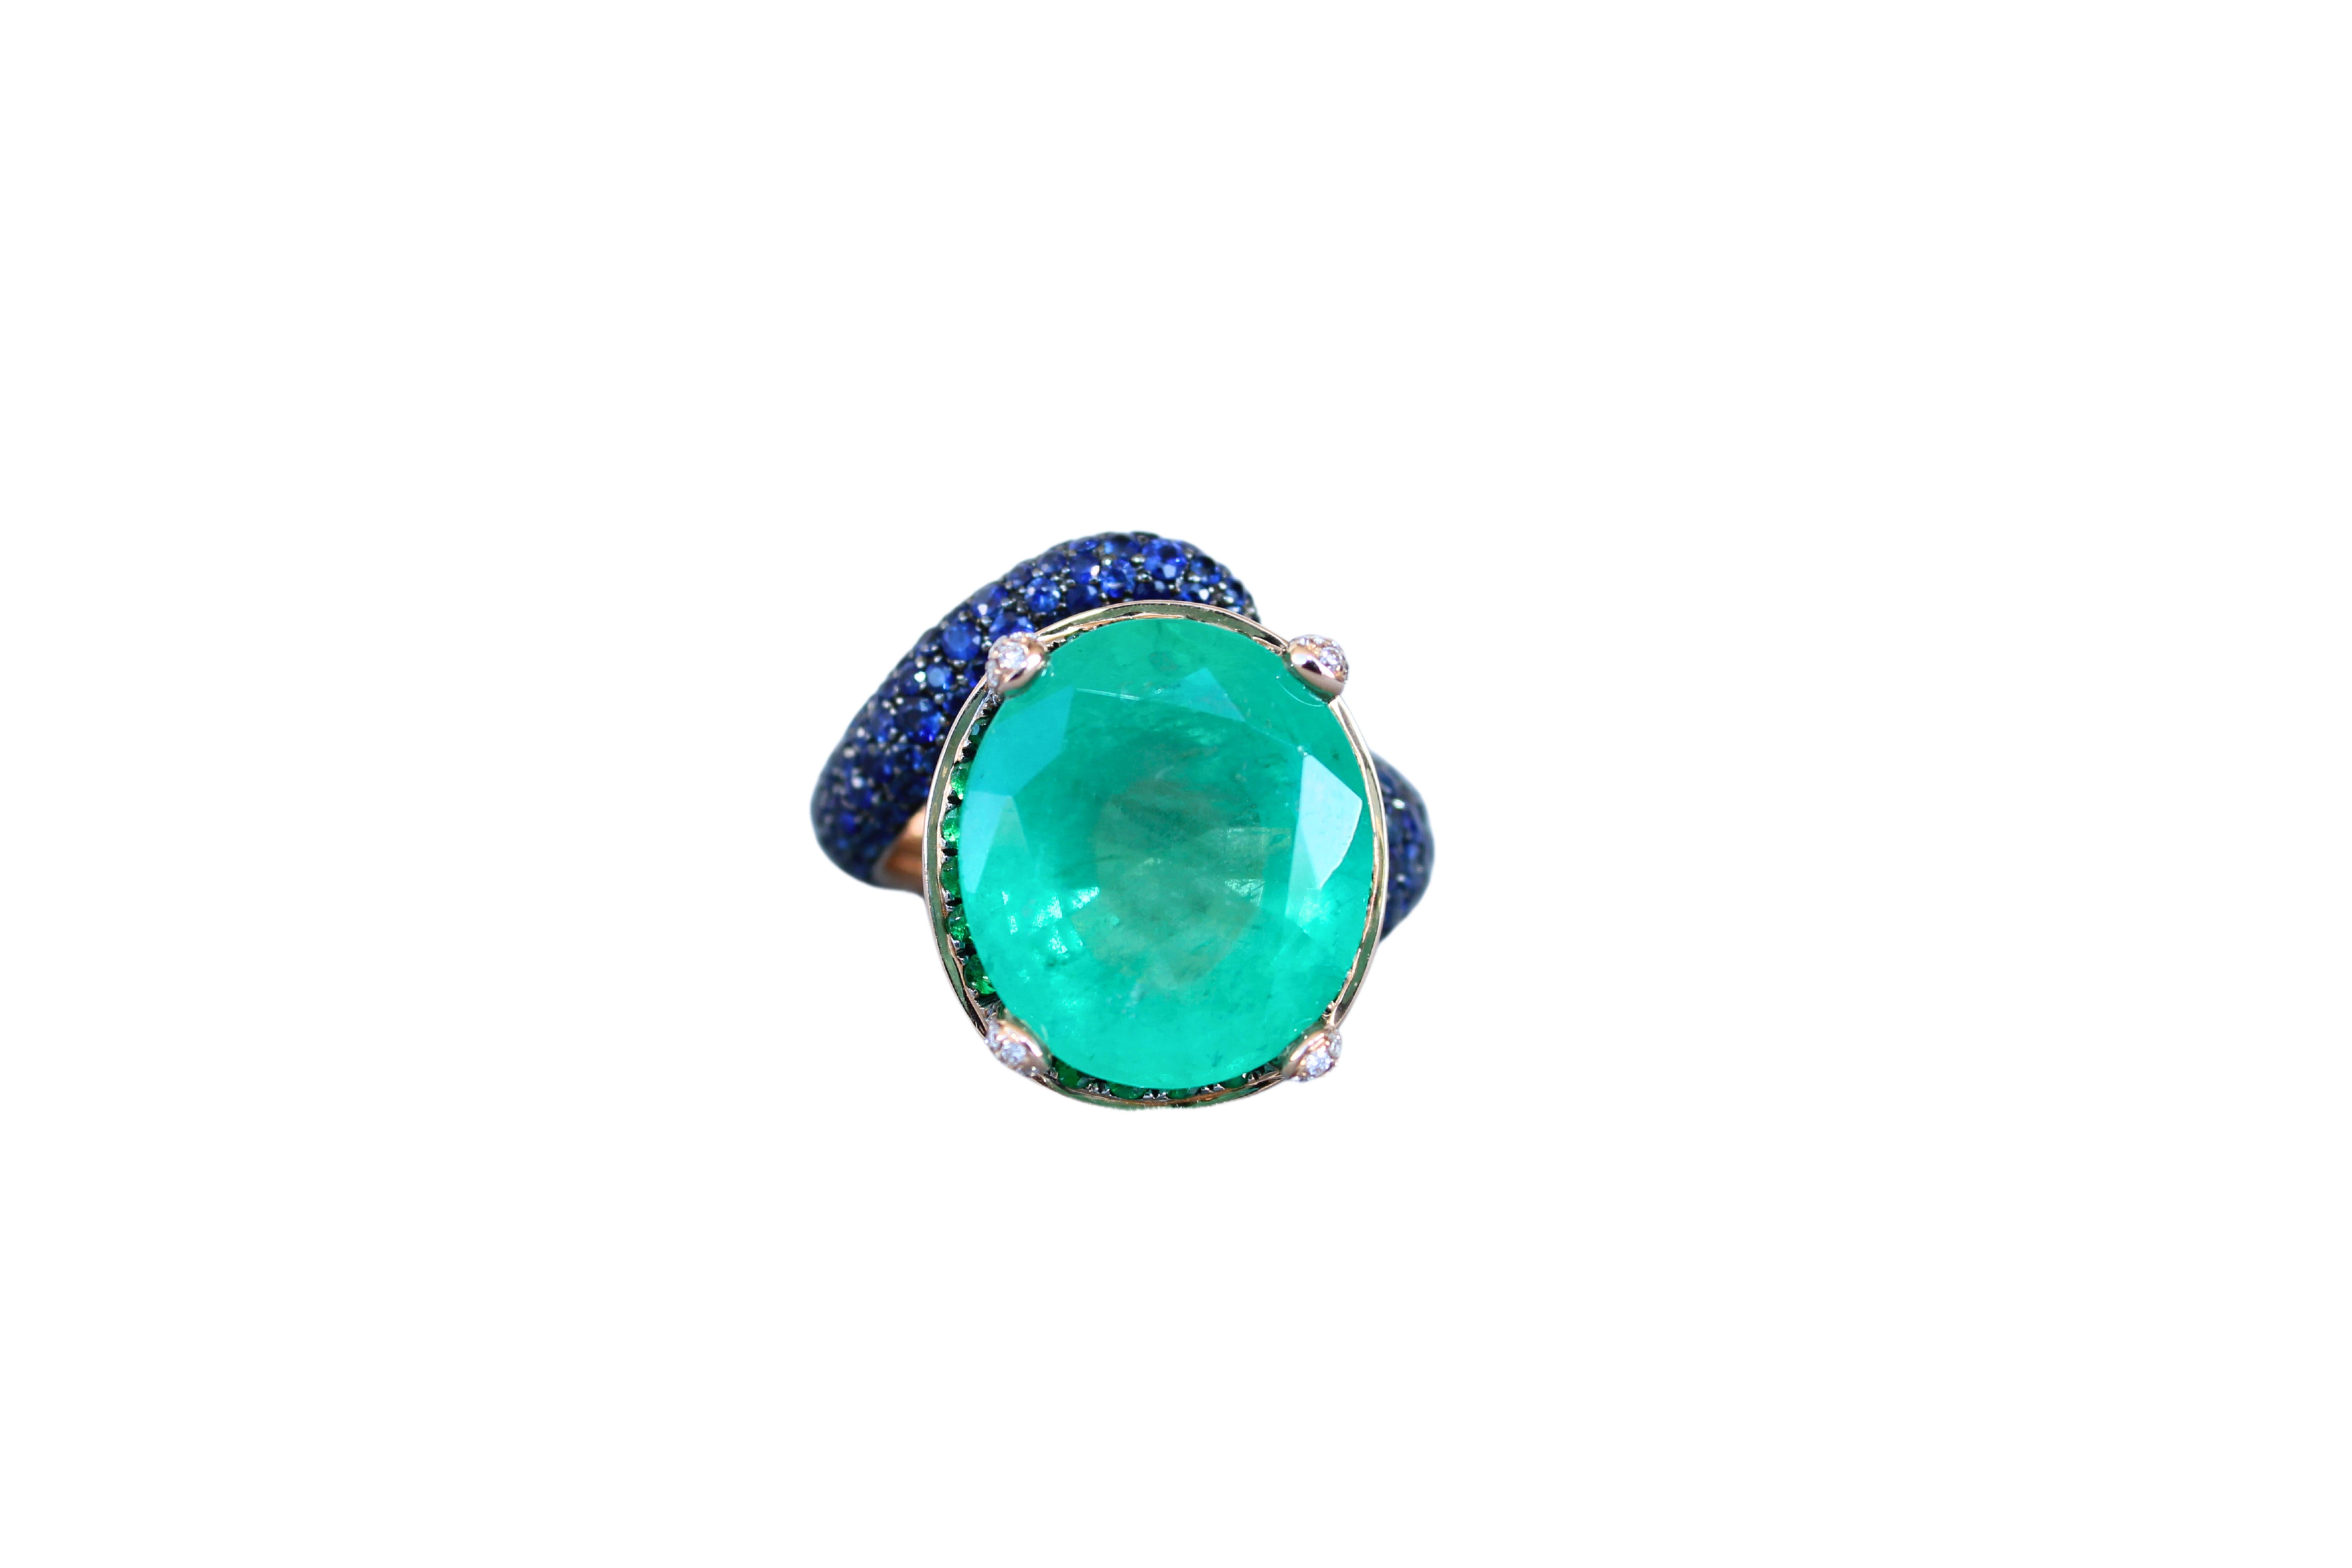 18K Yellow Gold 
14.28 grams
Inner size 5.75 - 6
14 Carats Oval-Shape Emerald
Untreated, Genuine & Natural
16.24 x 14.55 mm length width ratio of the Emerald
0.15 carats Diamonds G/VS Quality
2.5 Carats Blue Sapphires AAA Quality
3.0 Carats